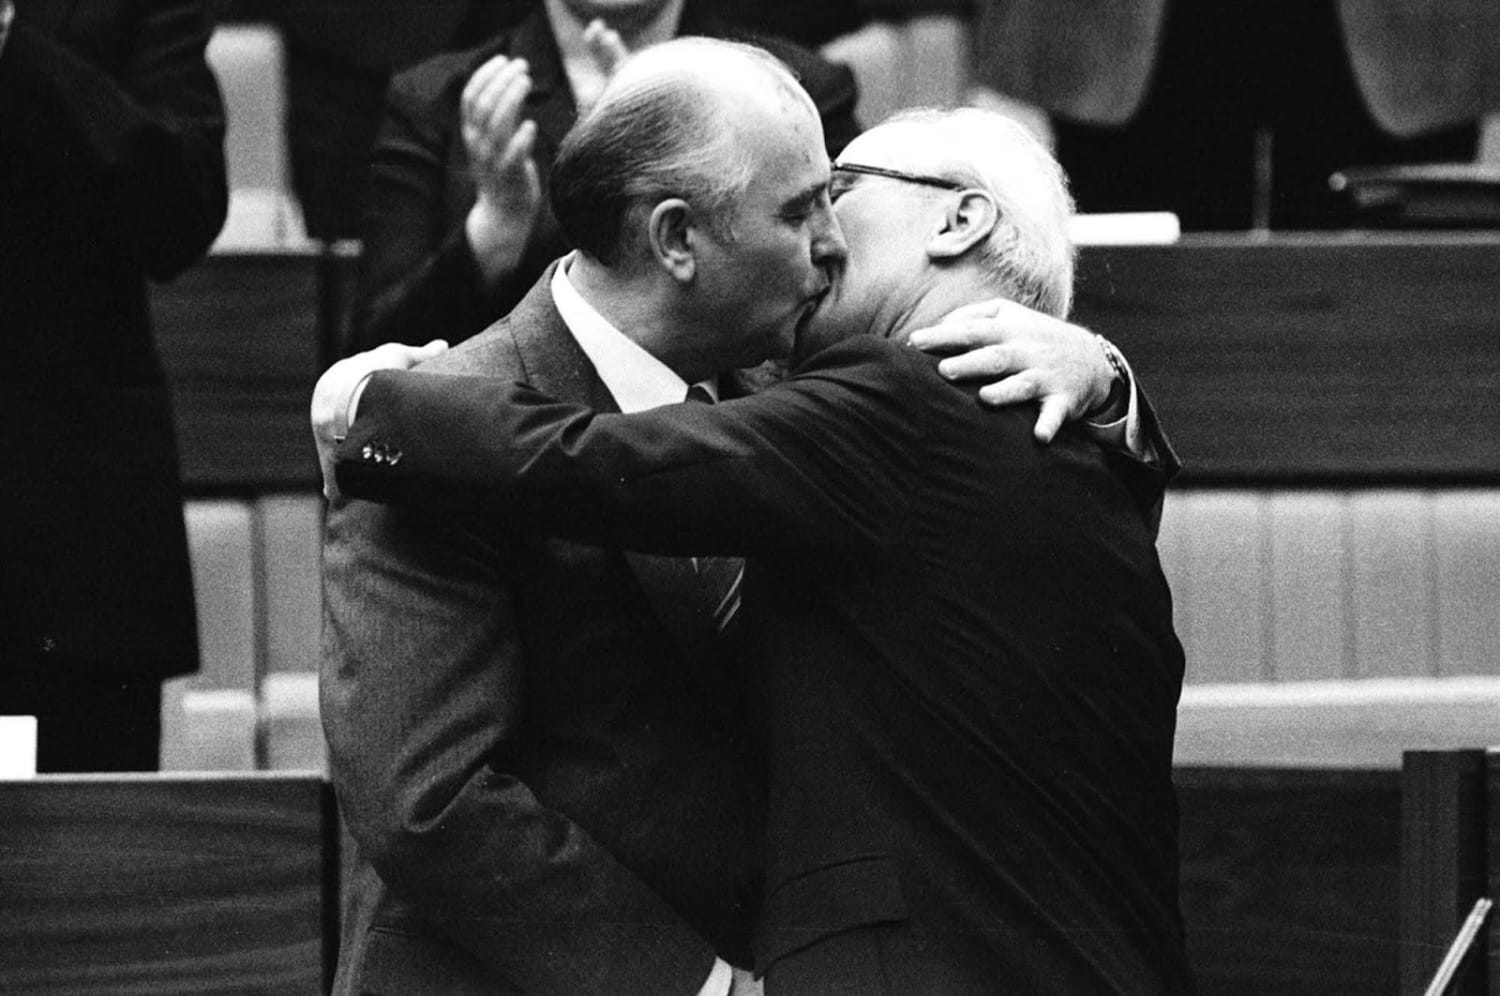 1986, USSR leader Gorbachev and DDR chairman Honecker performing a socialist fraternal kiss